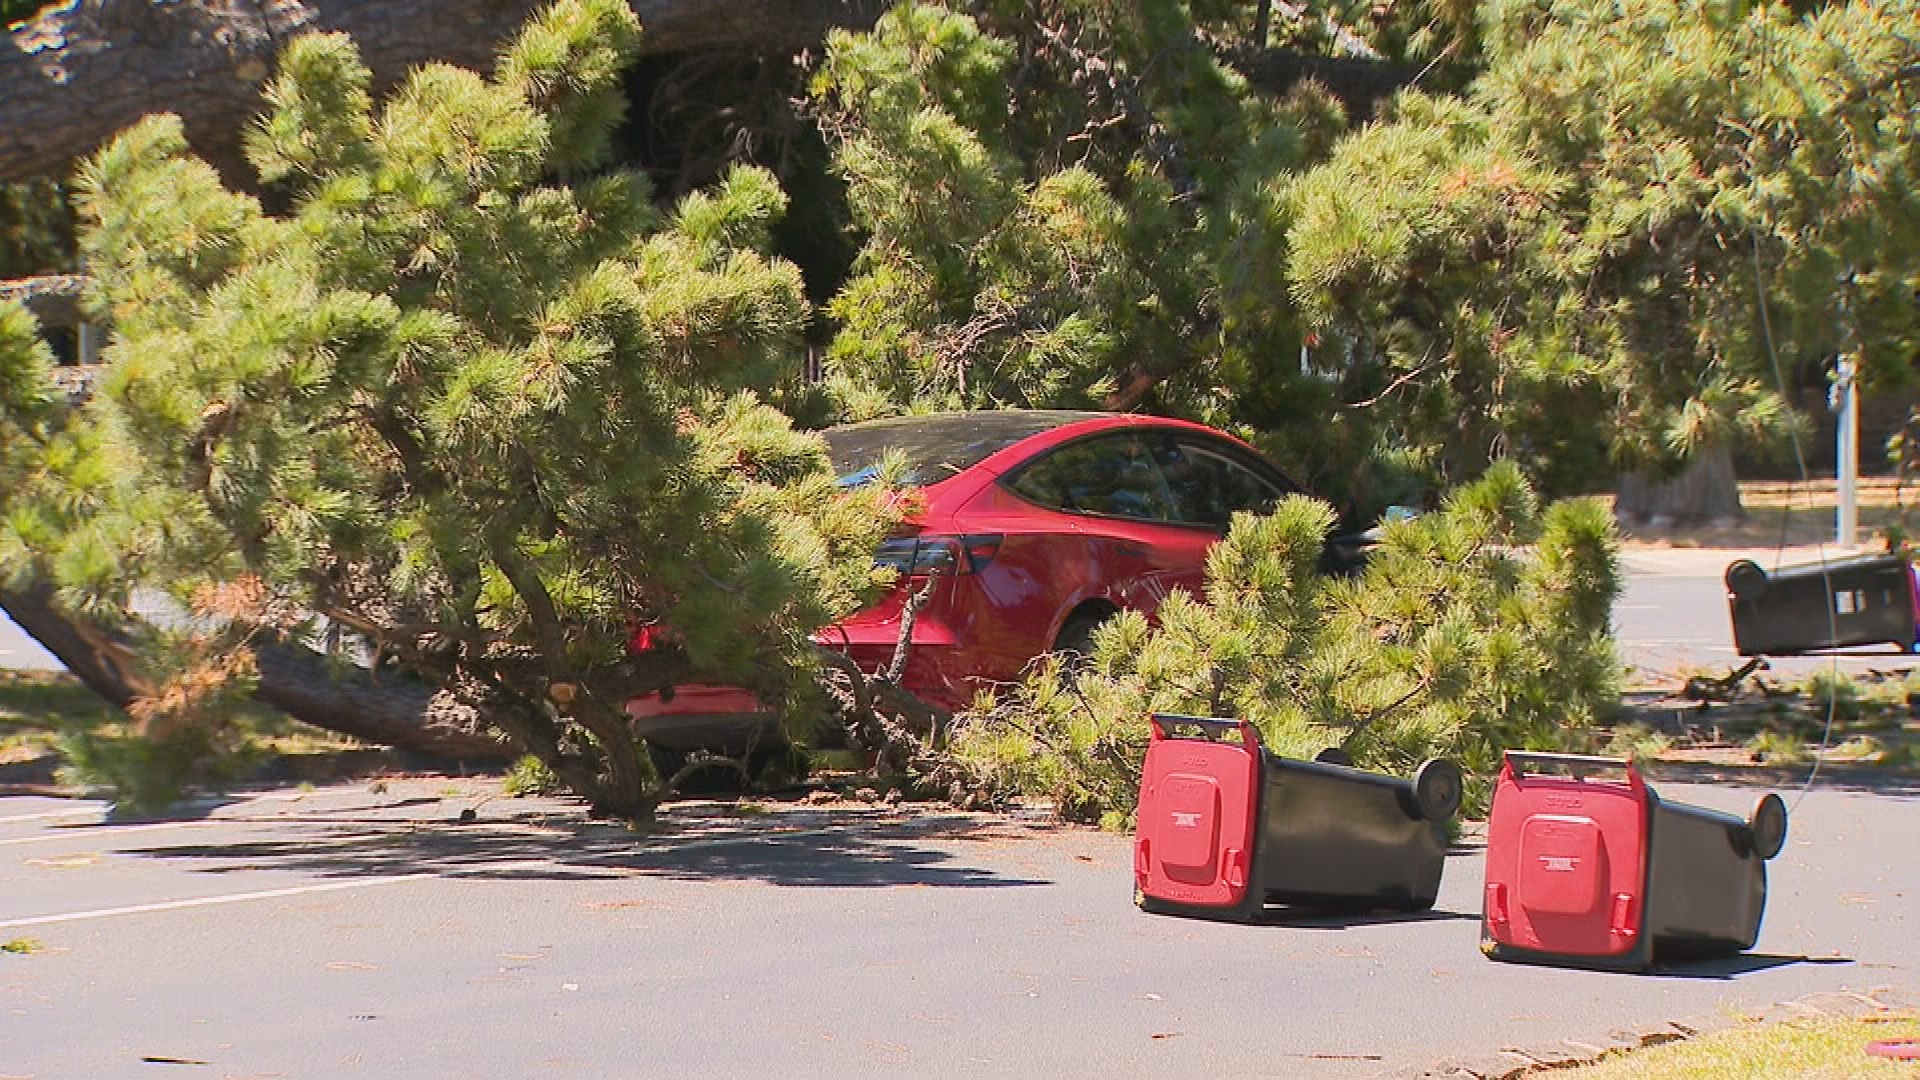 Driver escapes serious injury after huge tree falls on his car